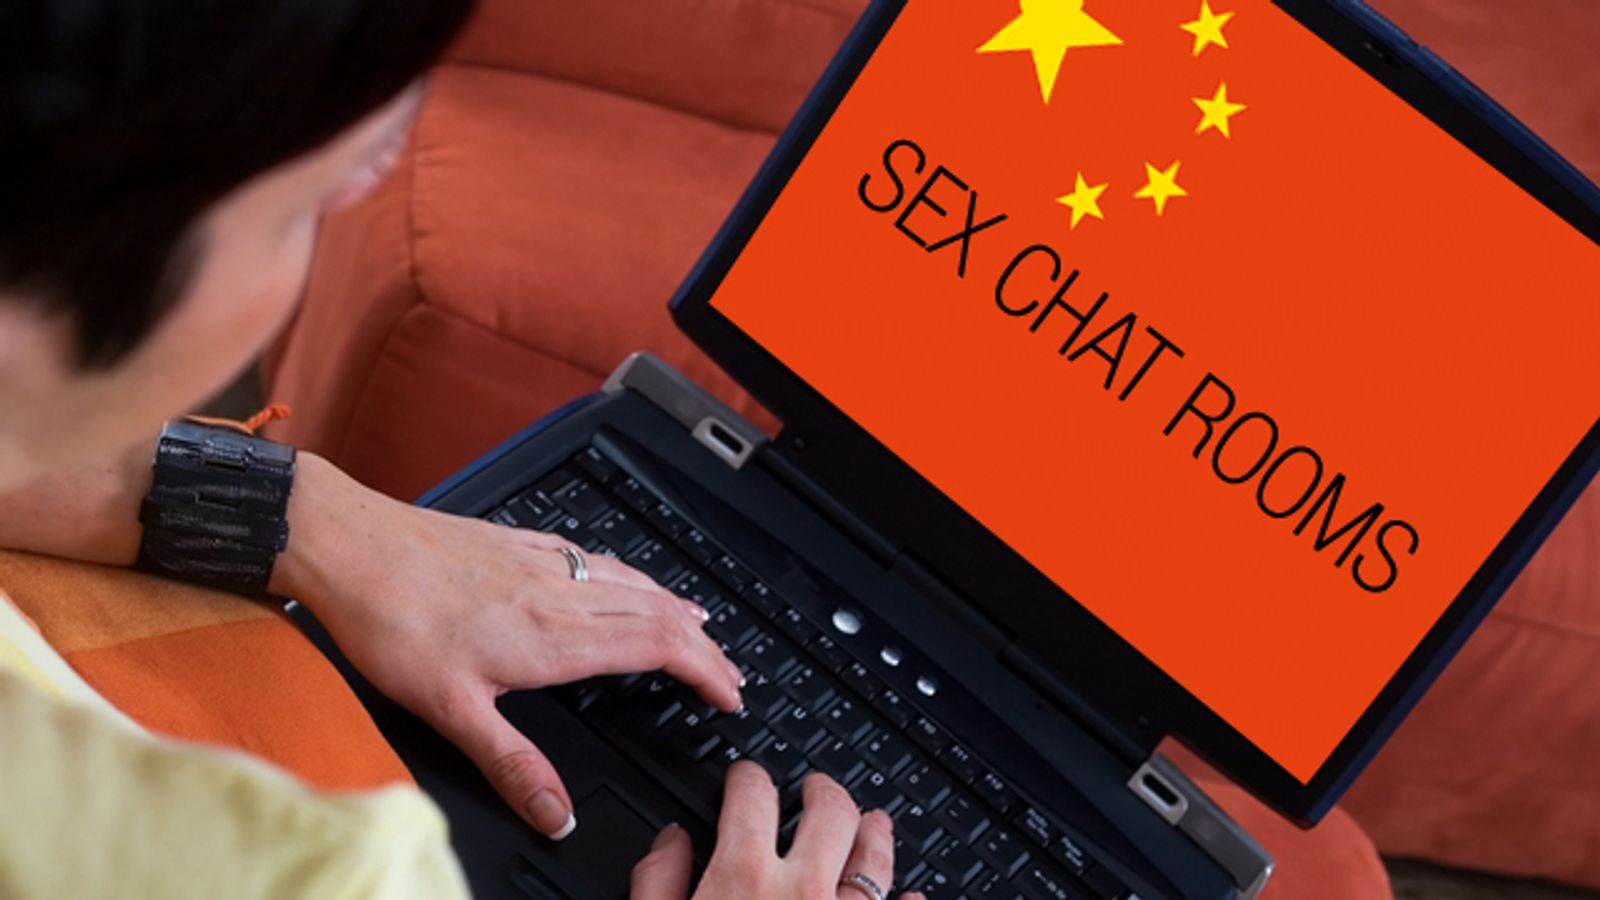 Chinese Sex Chat Room Operators Get Jail Time